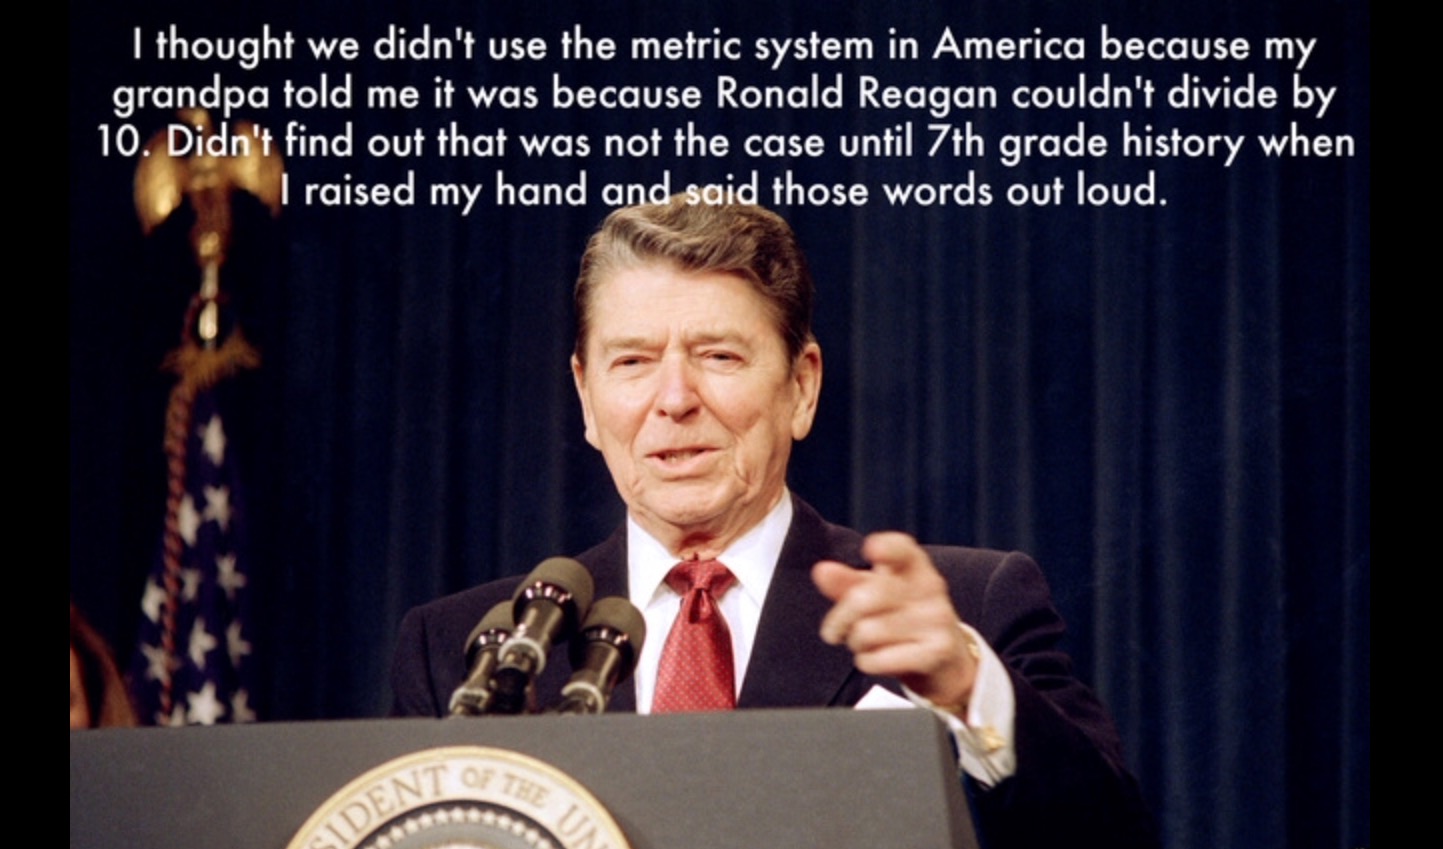 I thought we didn't use the metric system in America because my grandpa told me it was because Ronald Reagan couldn't divide by 10. Didn't find out that was not the case until 7th grade history when I raised my hand and said those words out loud. No The U